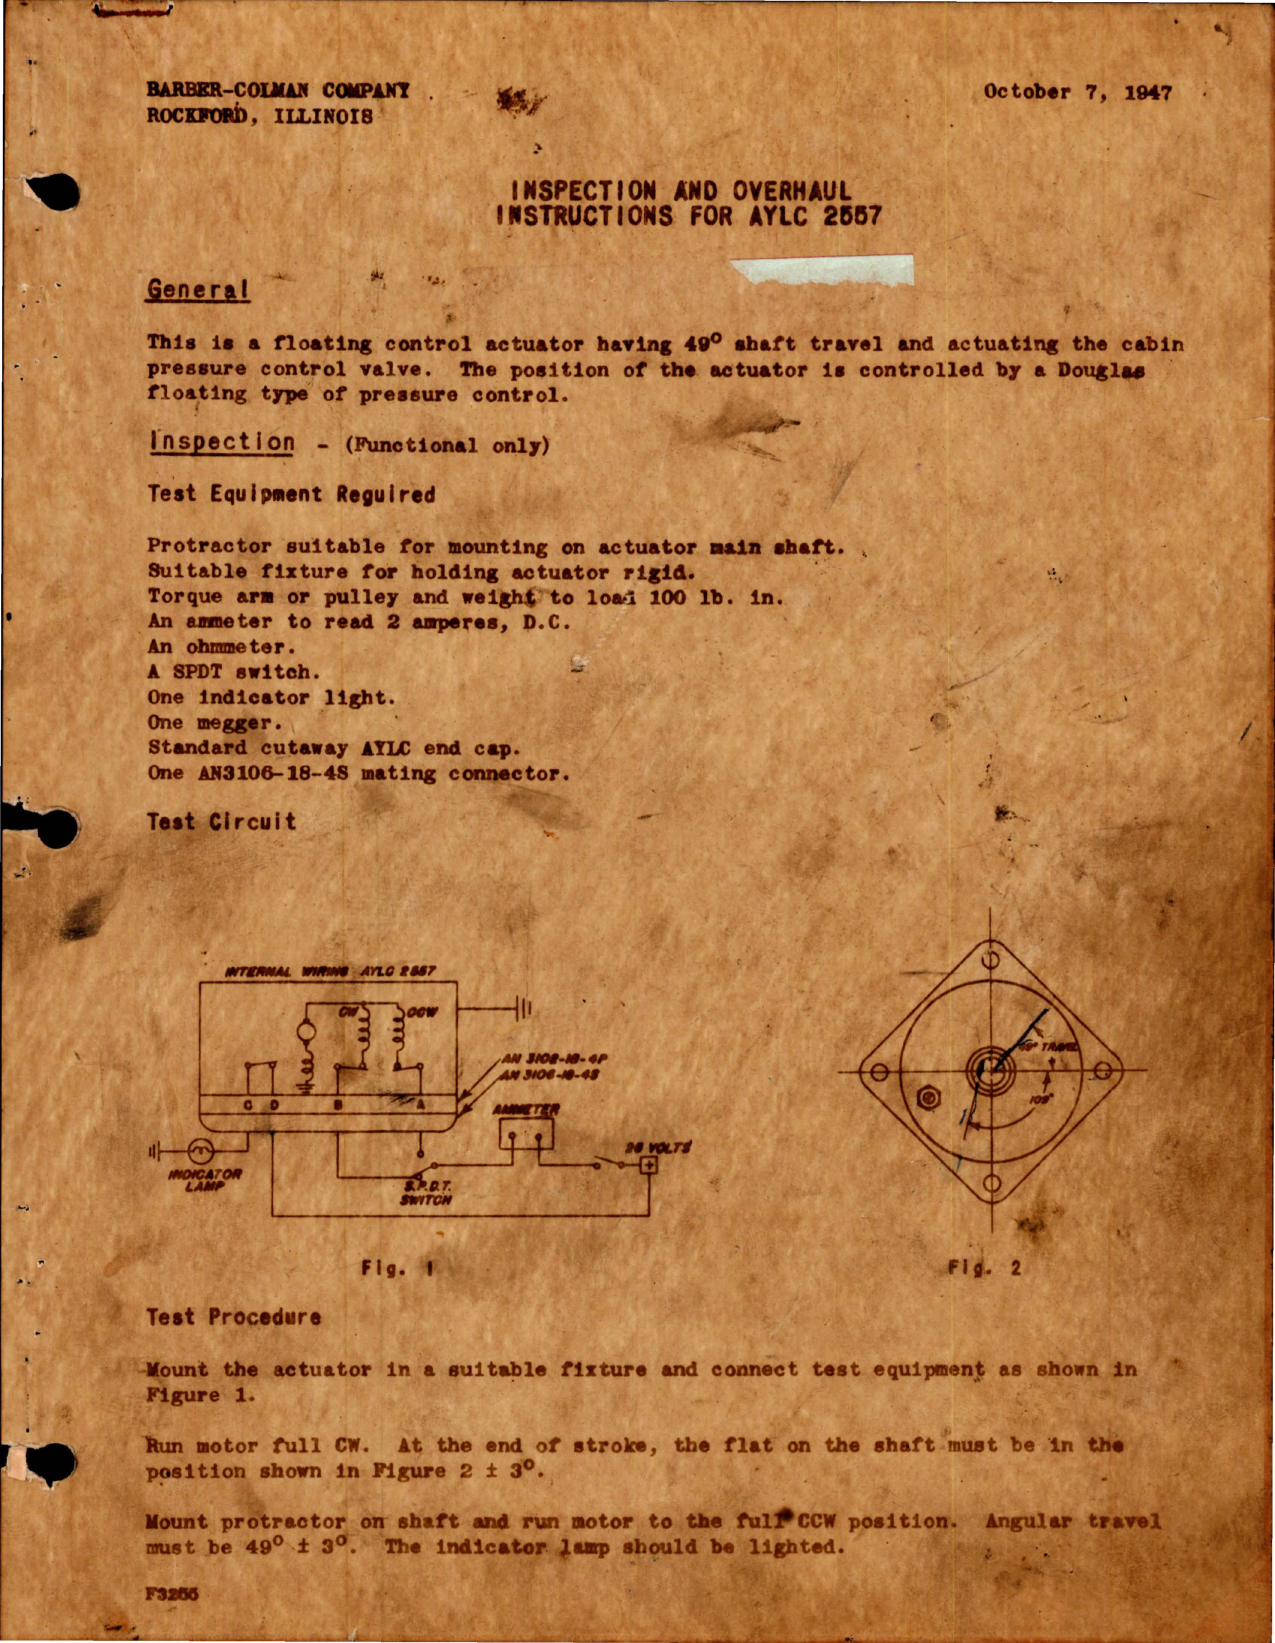 Sample page 1 from AirCorps Library document: Inspection and Overhaul Instructions for Floating Control Actuator - AYLC 2557 